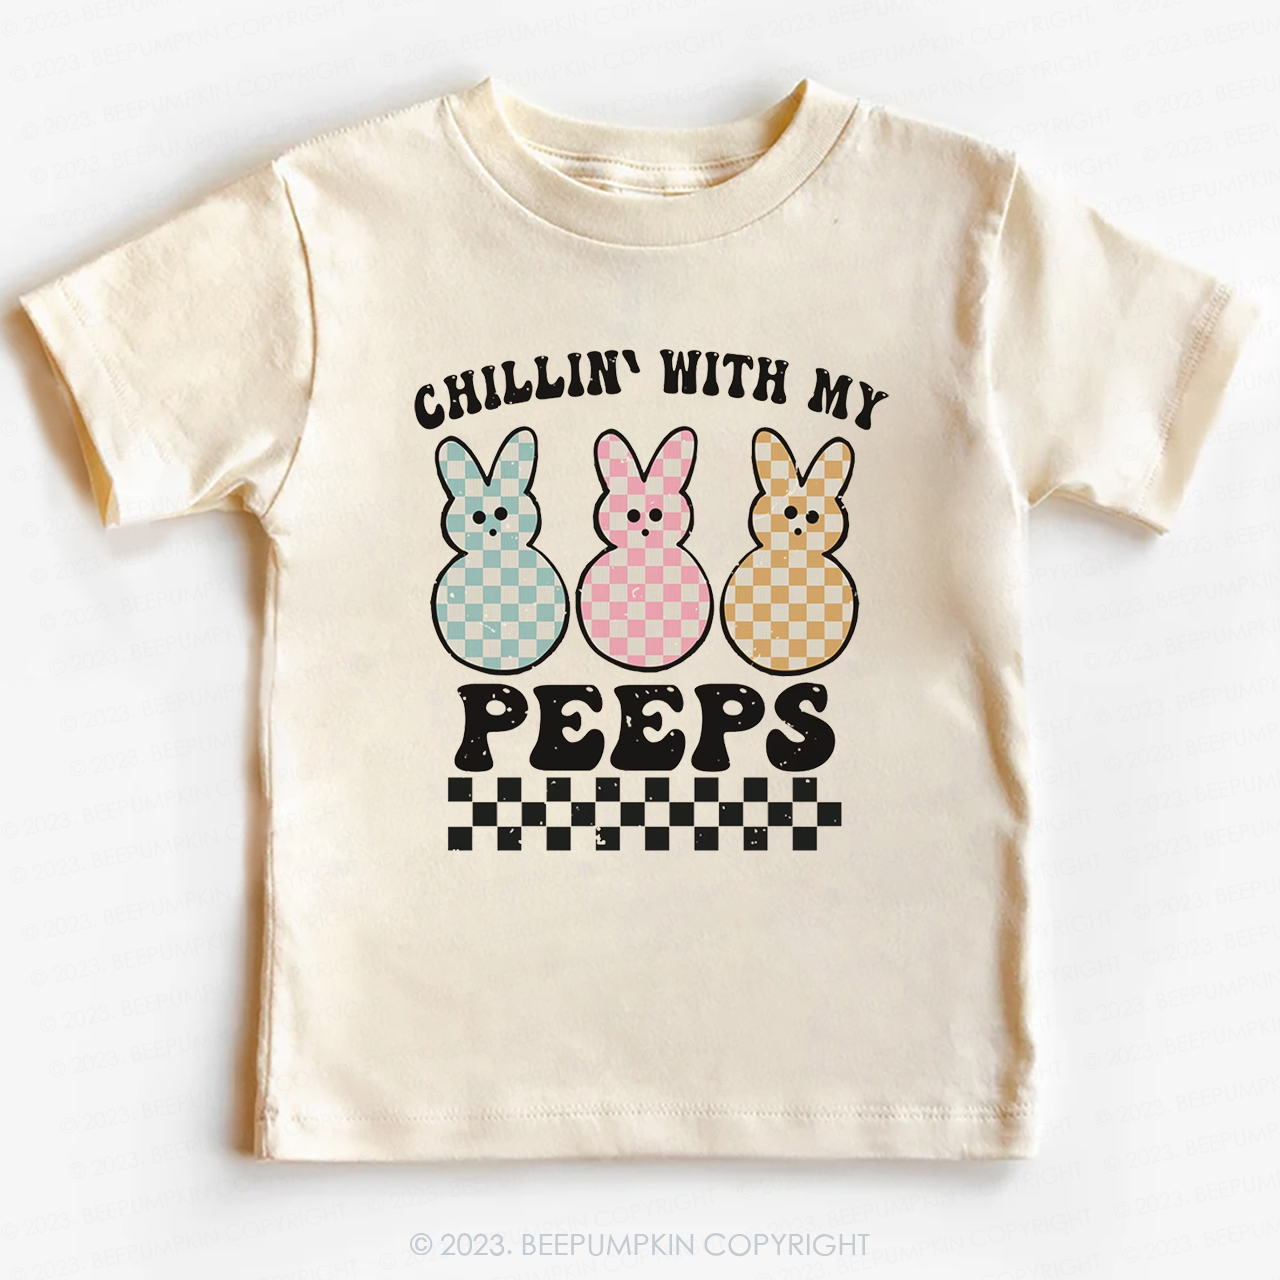 Retro Kids Easter Shirt - Chillin' With My Peeps